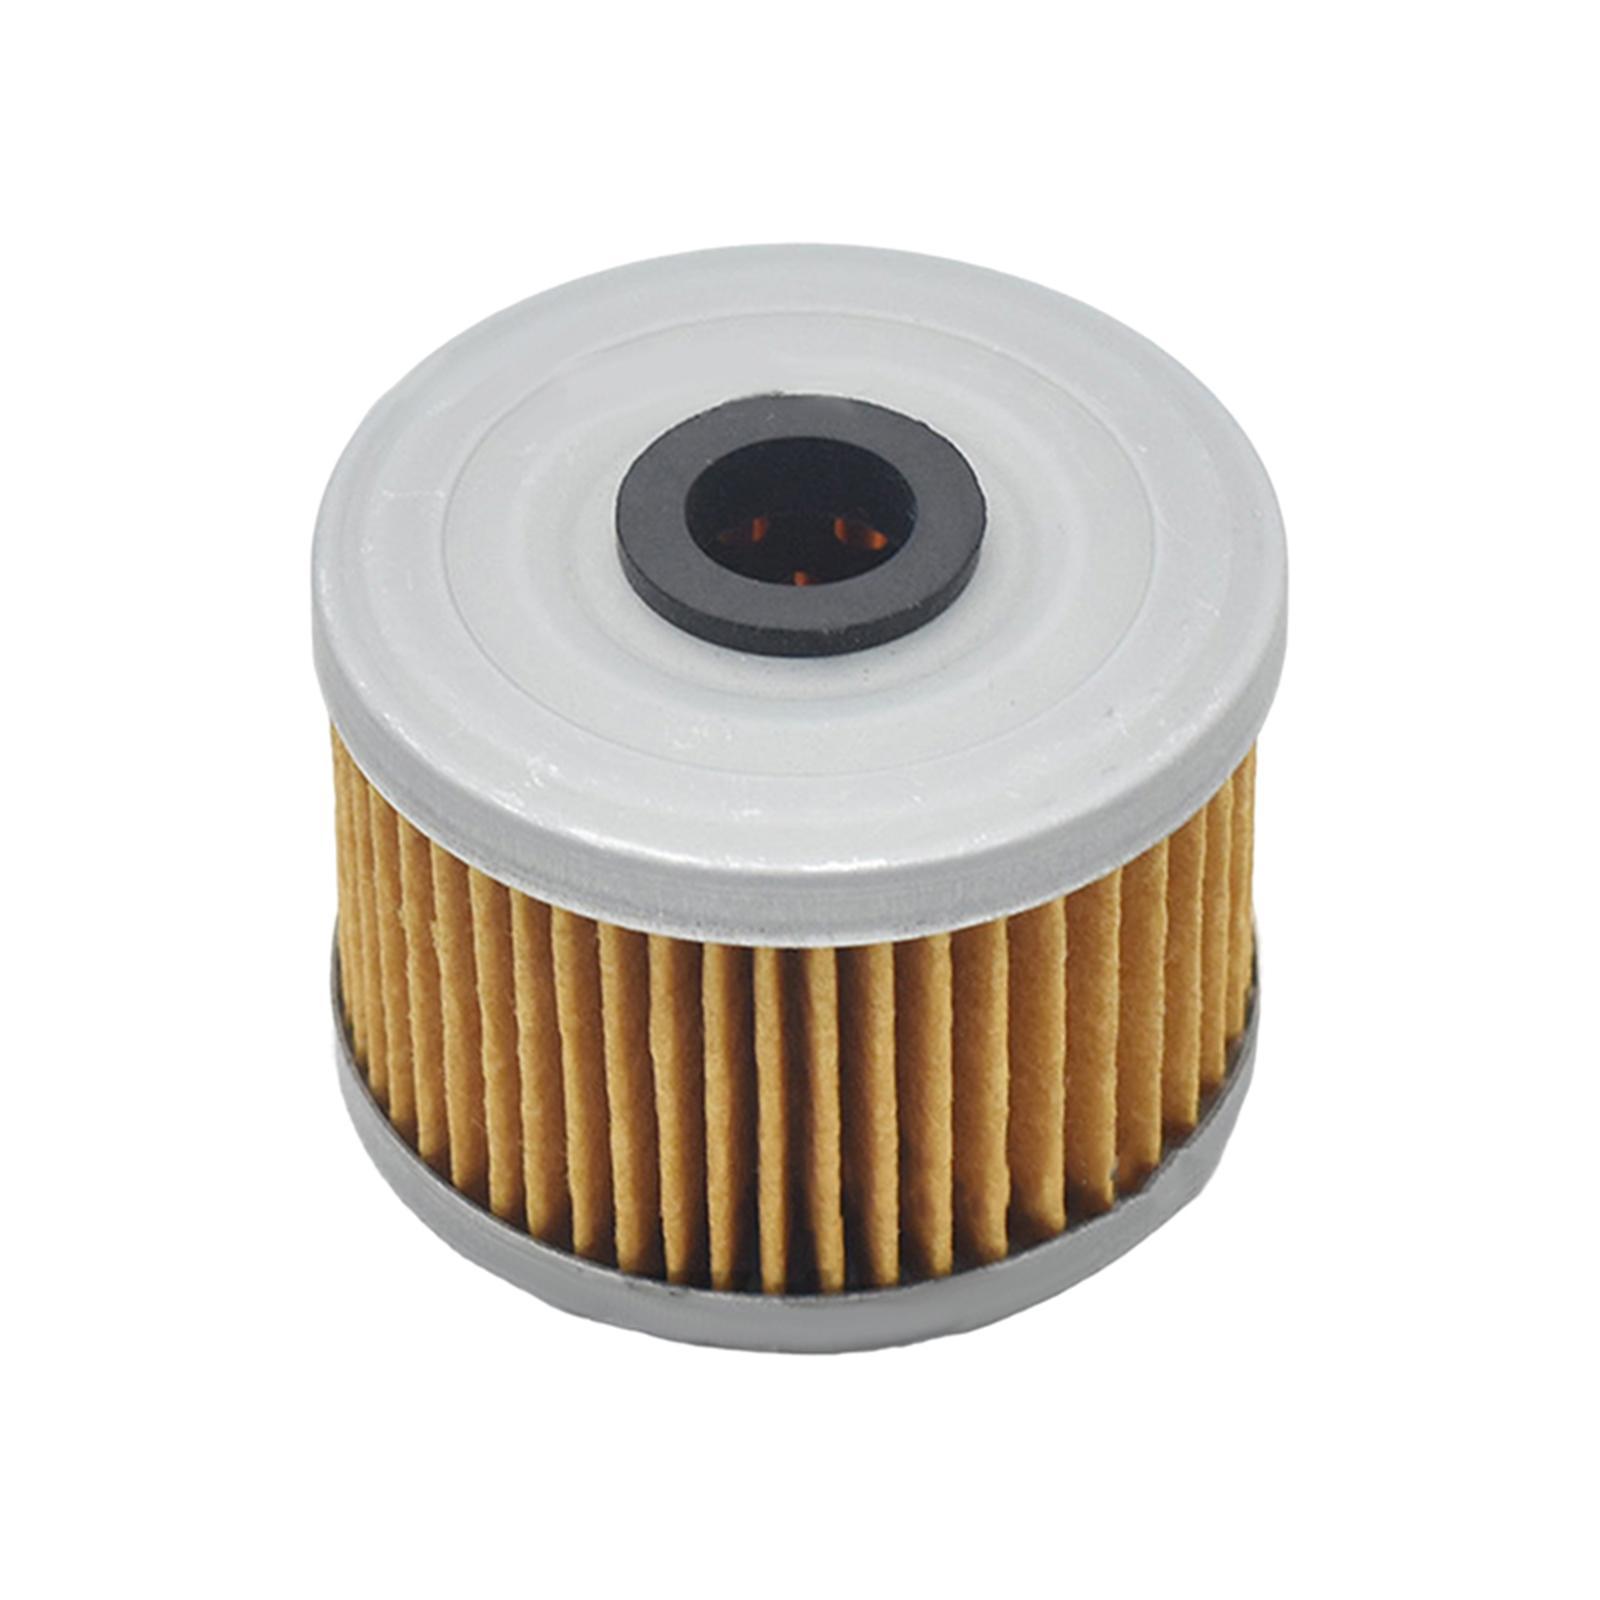 3xOil Filter for for Suzuki SP250 GZ250 DR250 DR350 DR400 TU250 350